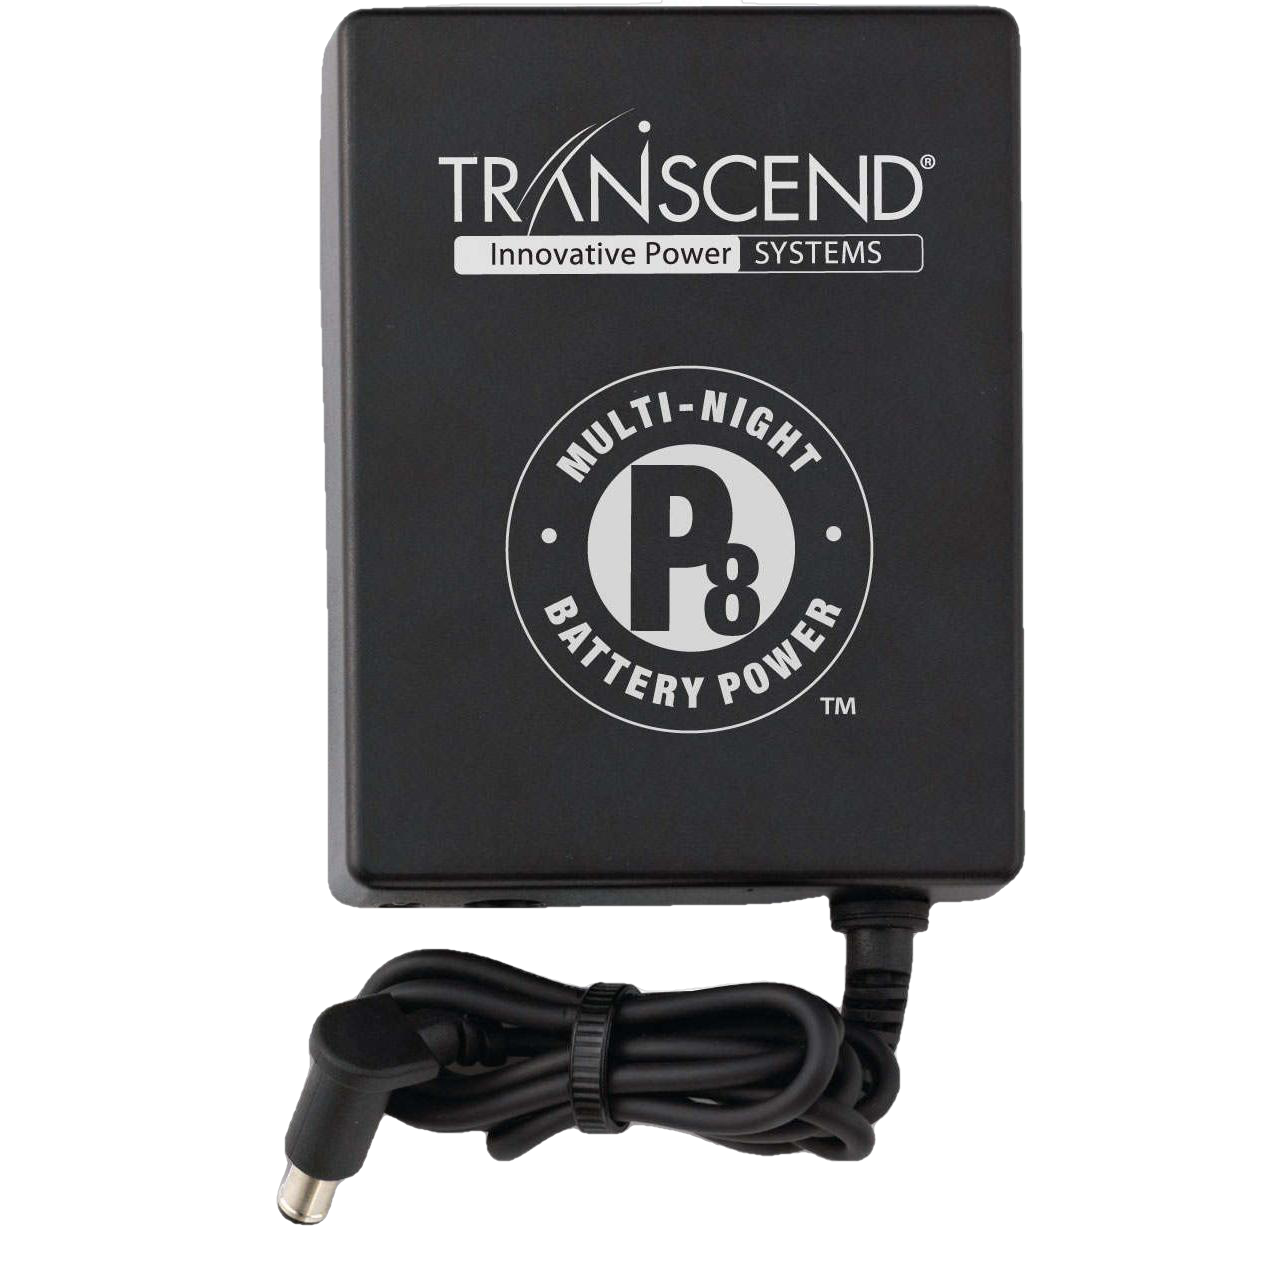 Transcend P8 Multi-Night Travel CPAP Battery New